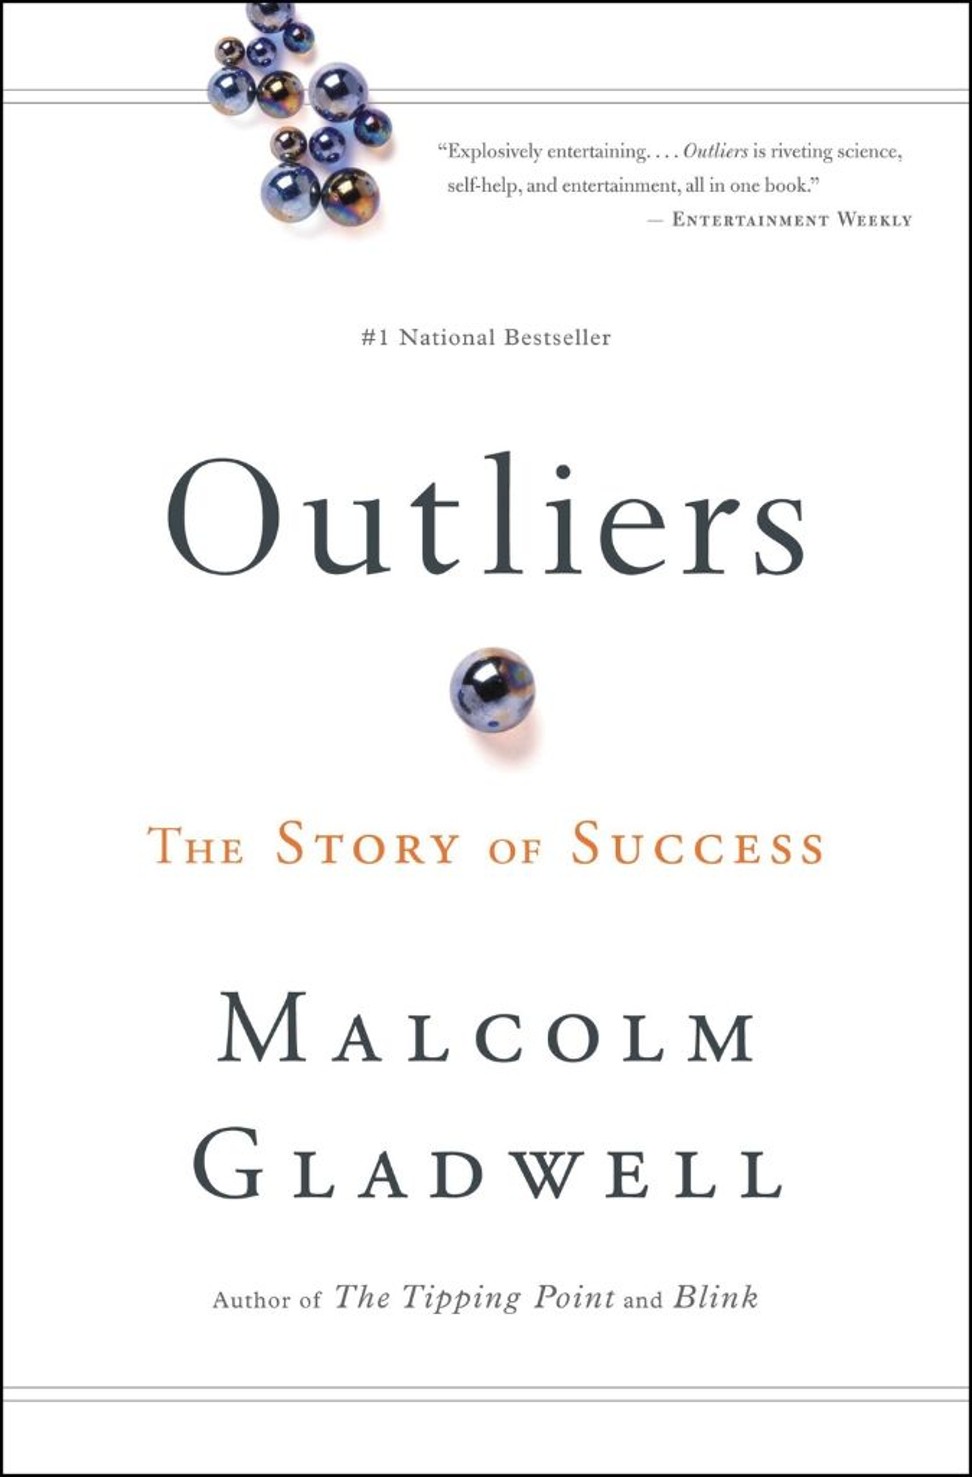 Outliers by Malcolm Gladwell.